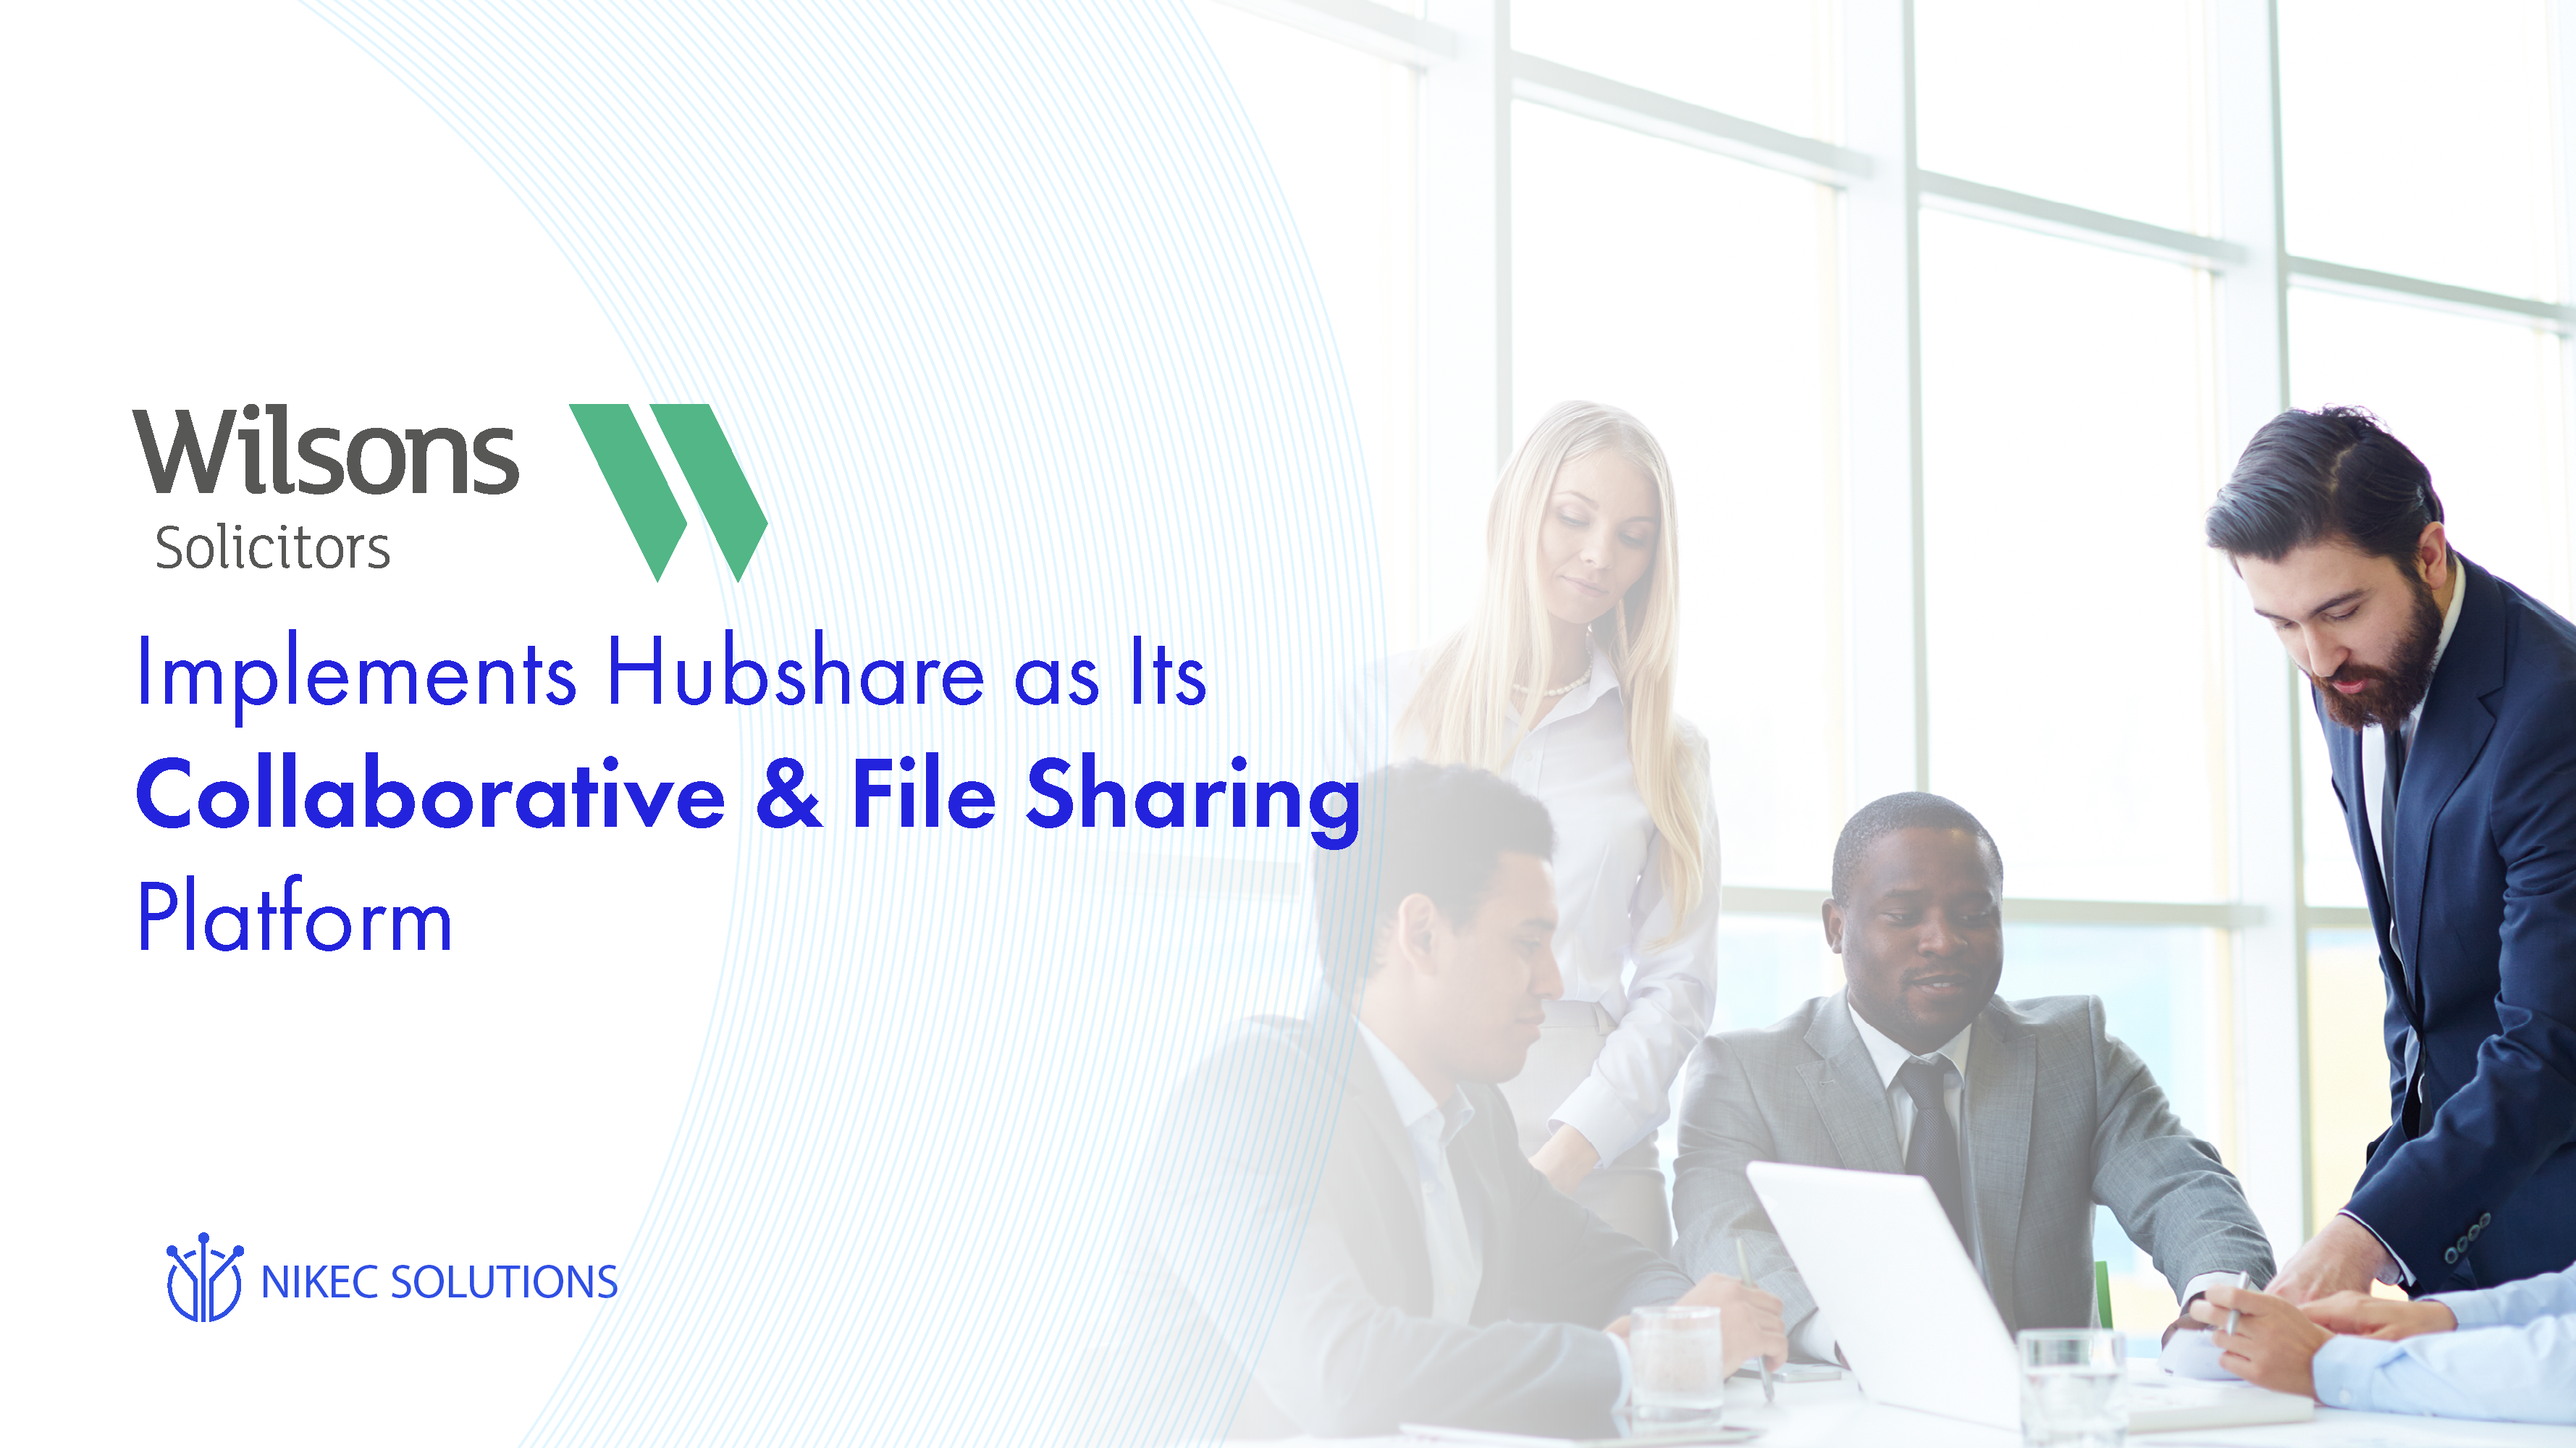 Wilsons Solicitors, a top 200 UK law firm with offices in Salisbury and London, has implemented Collaborative & File Sharing Platform Hubshare.